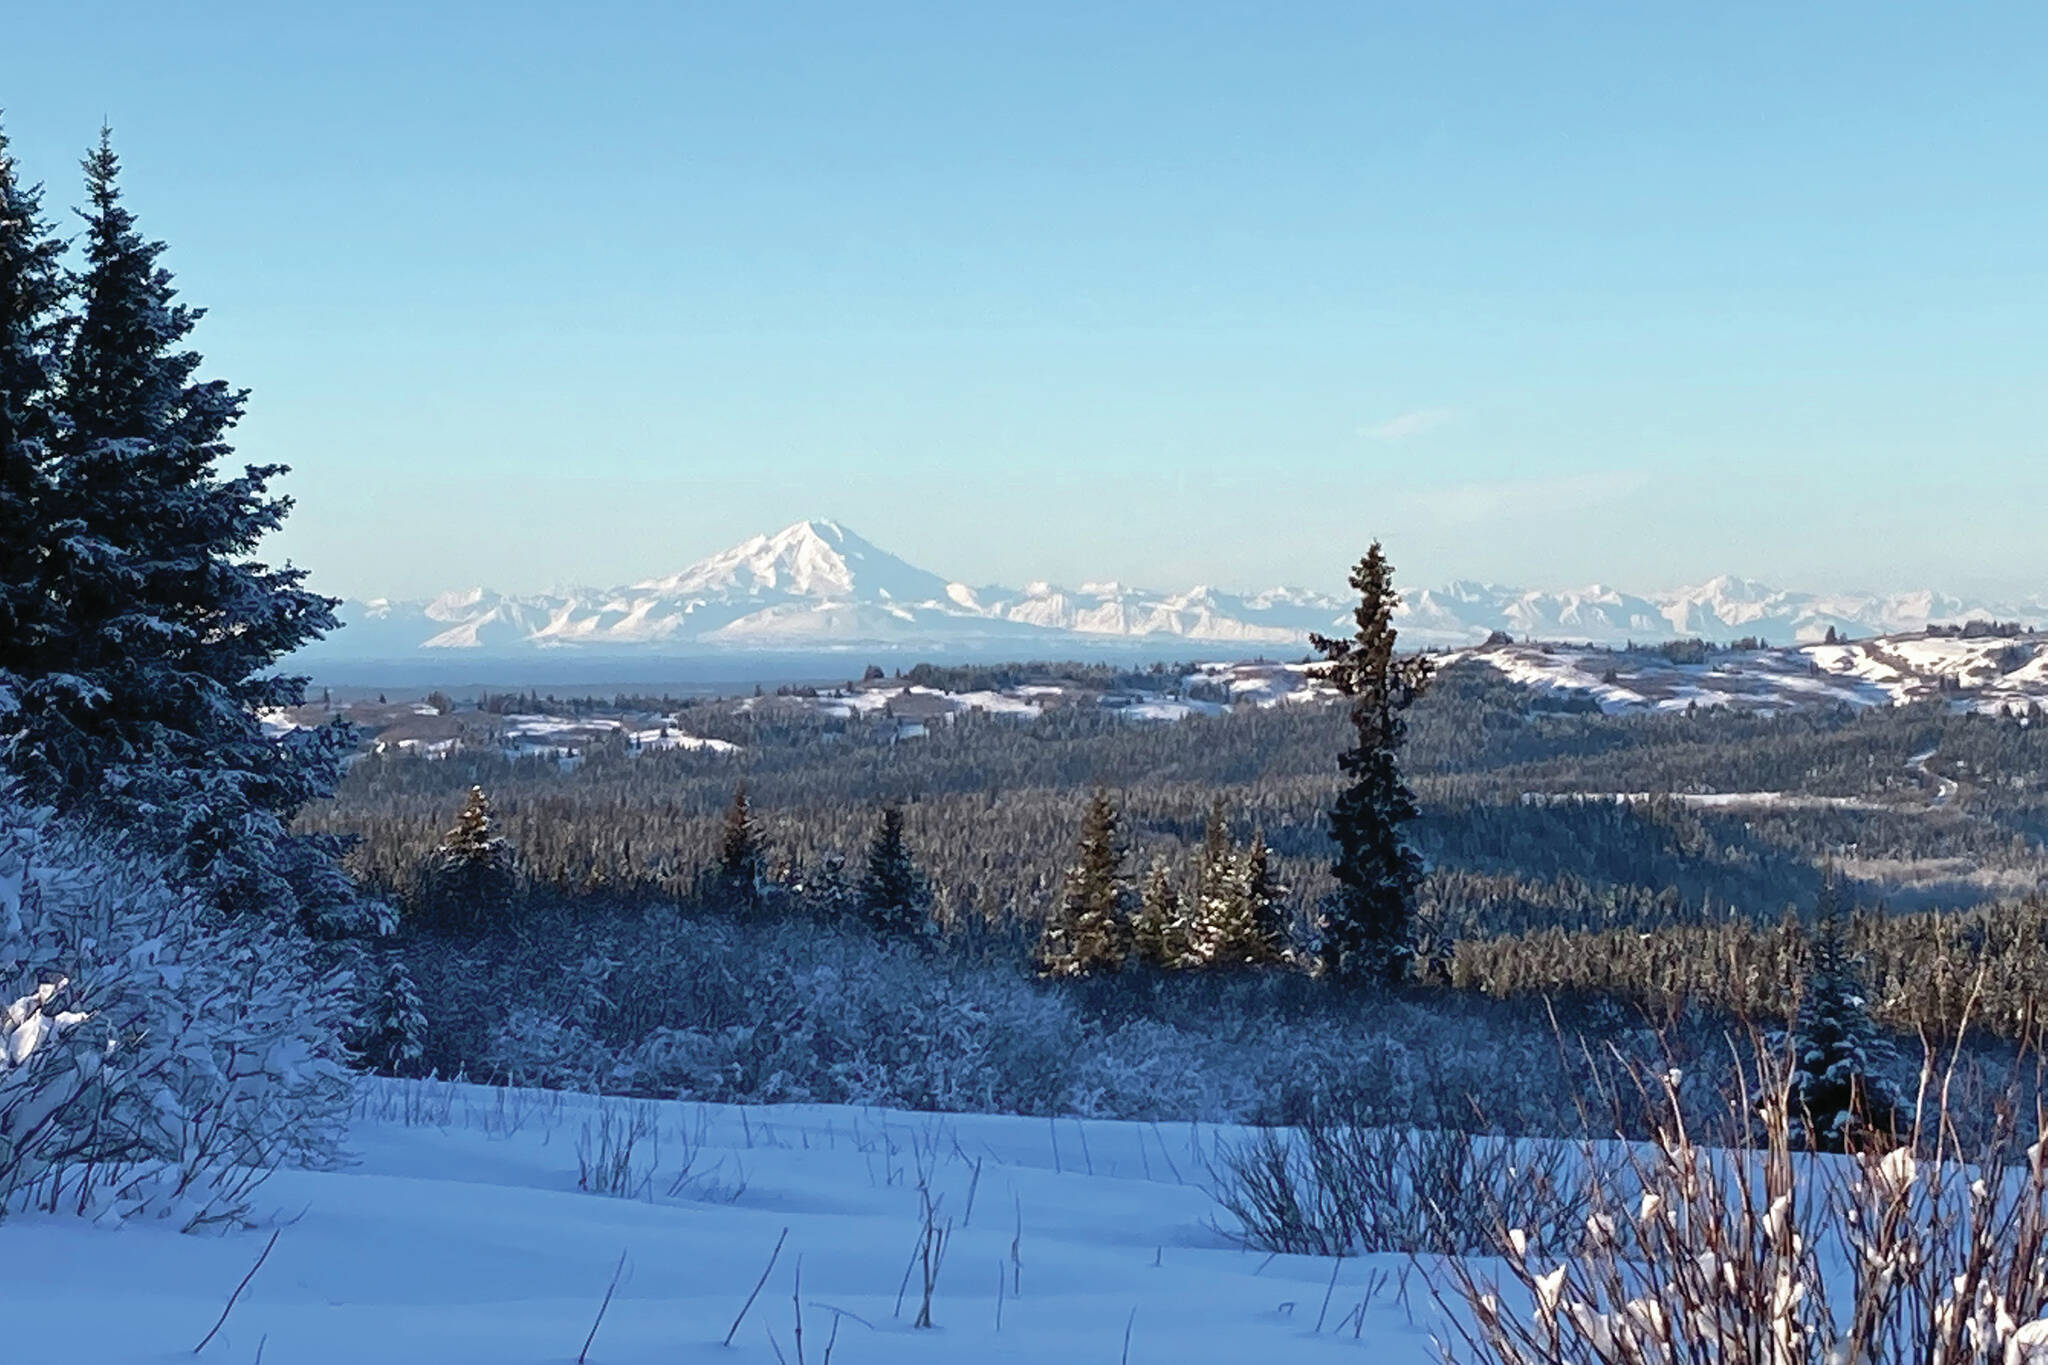 Mt. Redoubt can be seen across Cook Inlet from Diamond Ridge on the Marathon Ski Trail on Sunday, Jan. 24, 2021, near Homer, Alaska. (Photo by Michael Armstrong/Homer News)